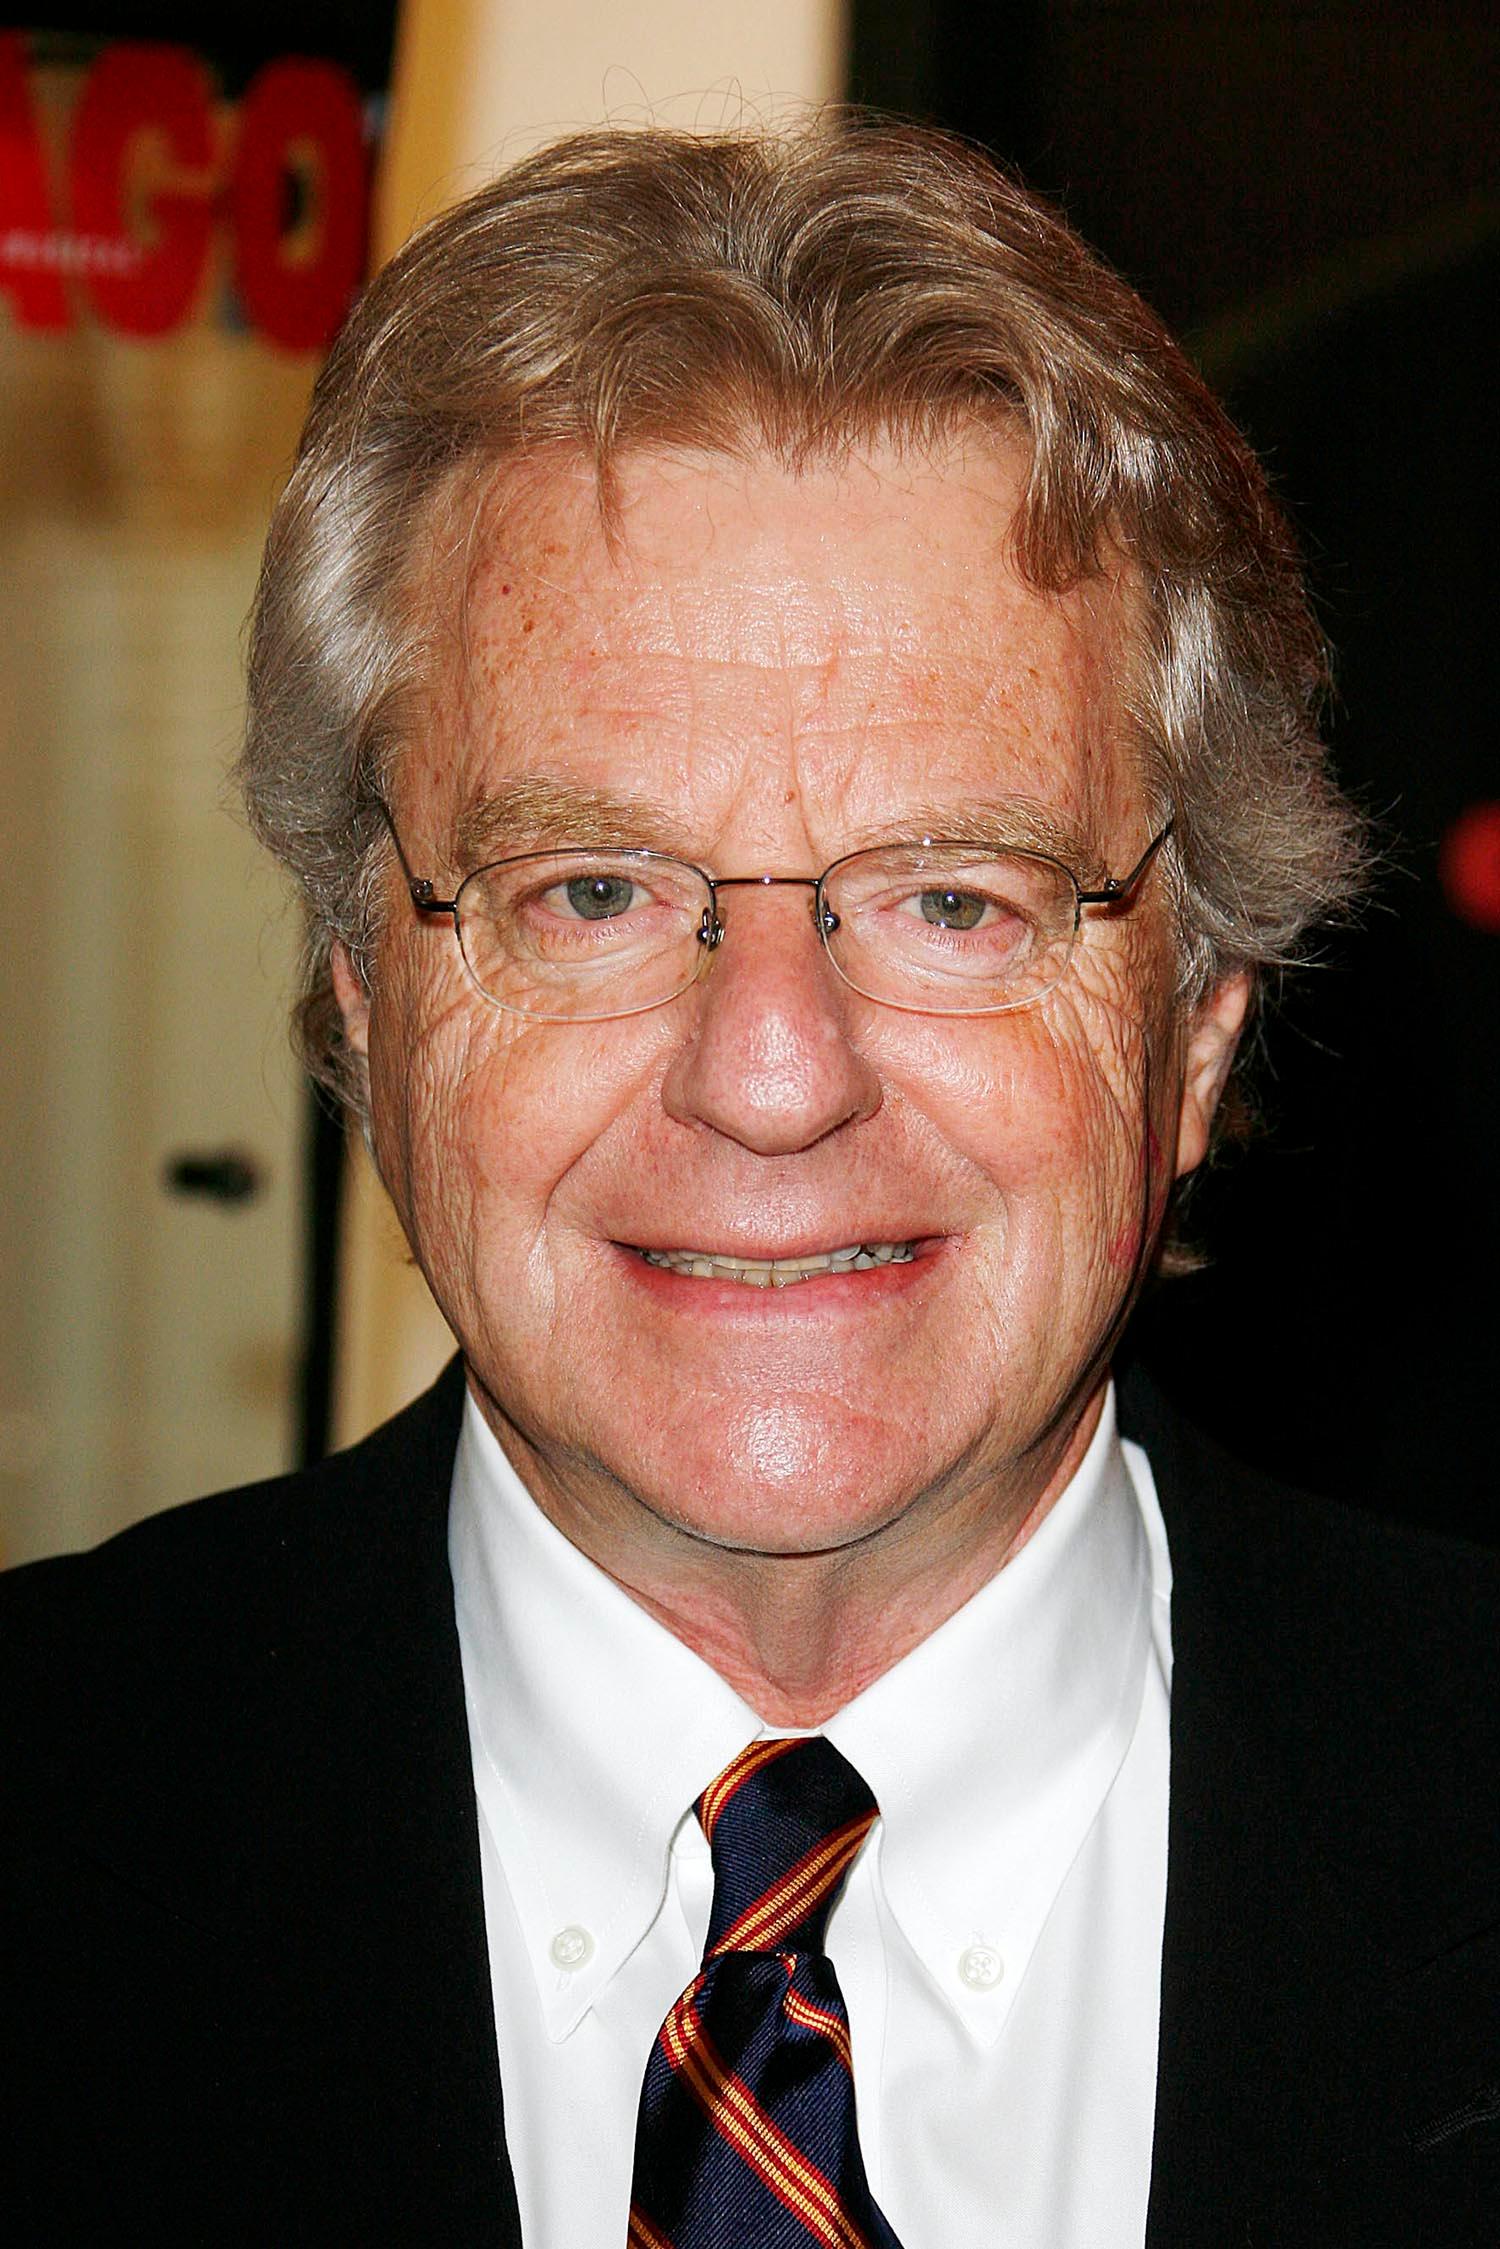 US ONLY OUTSPOKEN AMERICAN CHAT SHOW HOST JERRY SPRINGER